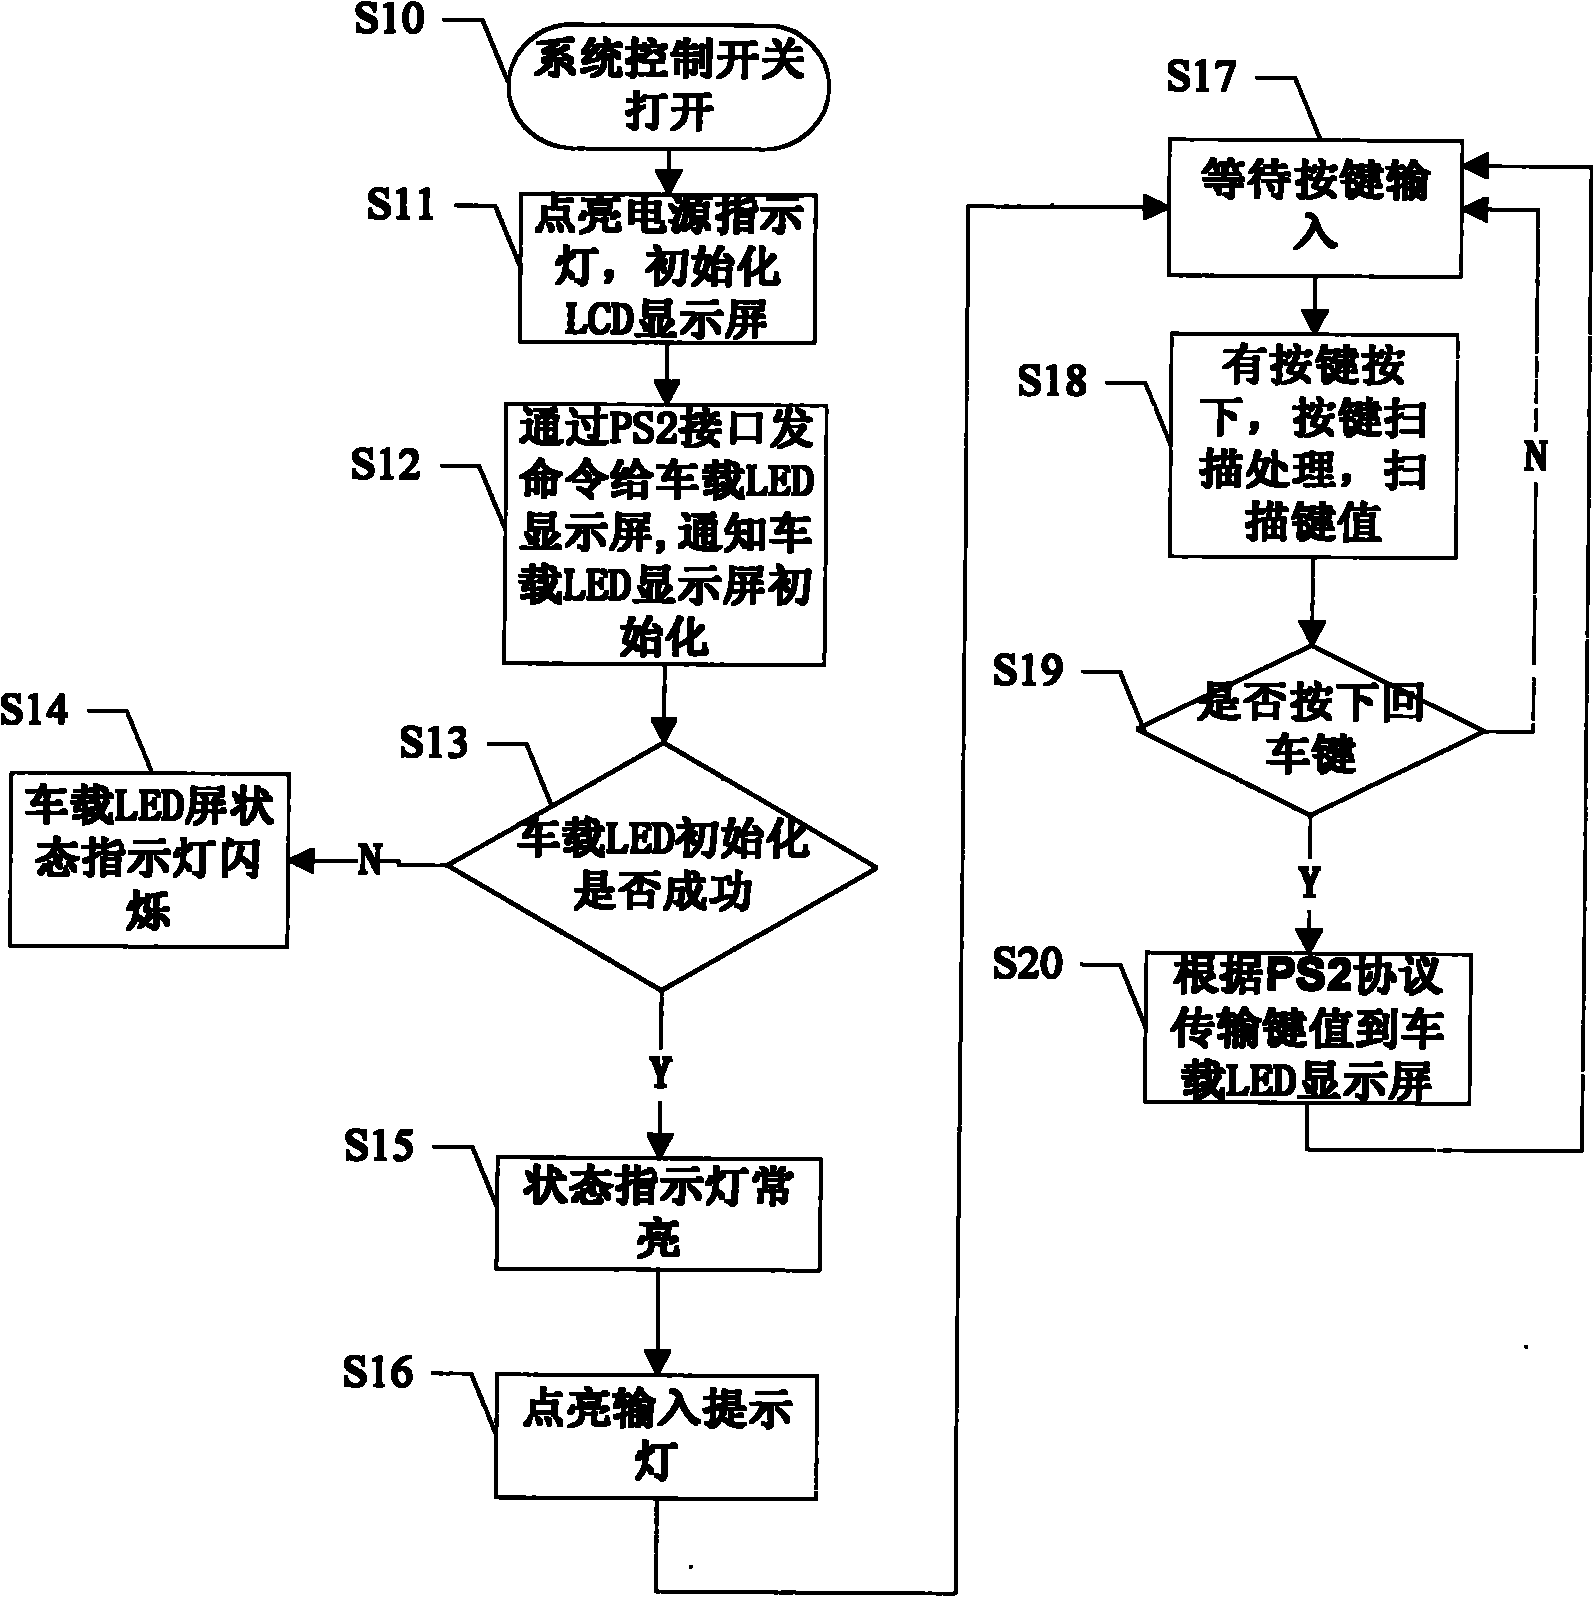 Implement method and display system for car sharing based on cab